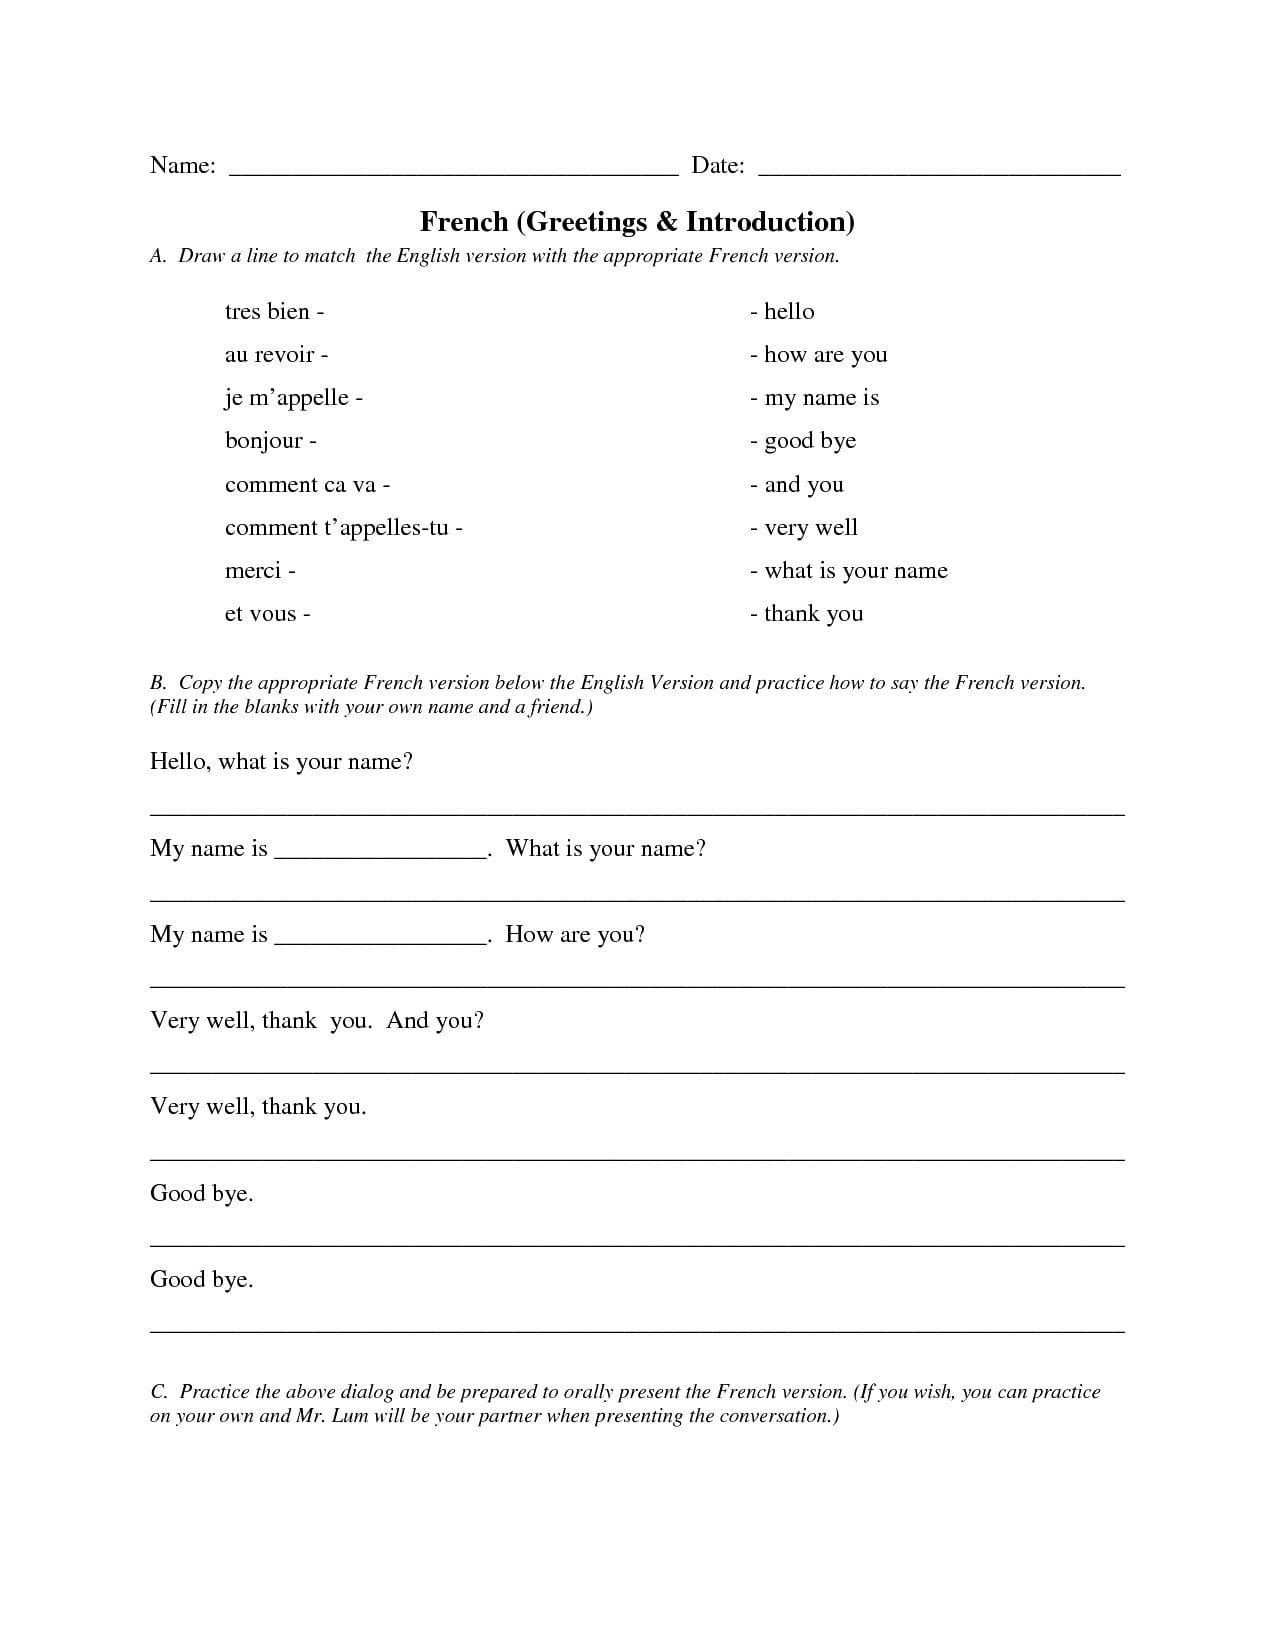 French Greetings  Introductions  Exercises In French Intended For French Worksheets For Beginners Pdf